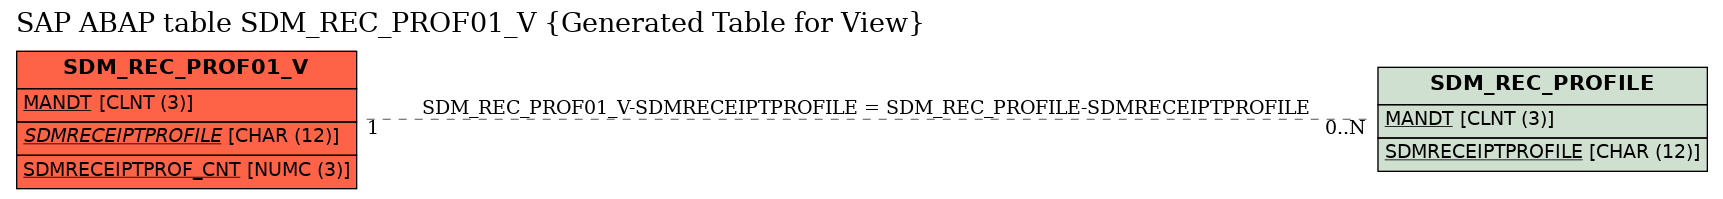 E-R Diagram for table SDM_REC_PROF01_V (Generated Table for View)